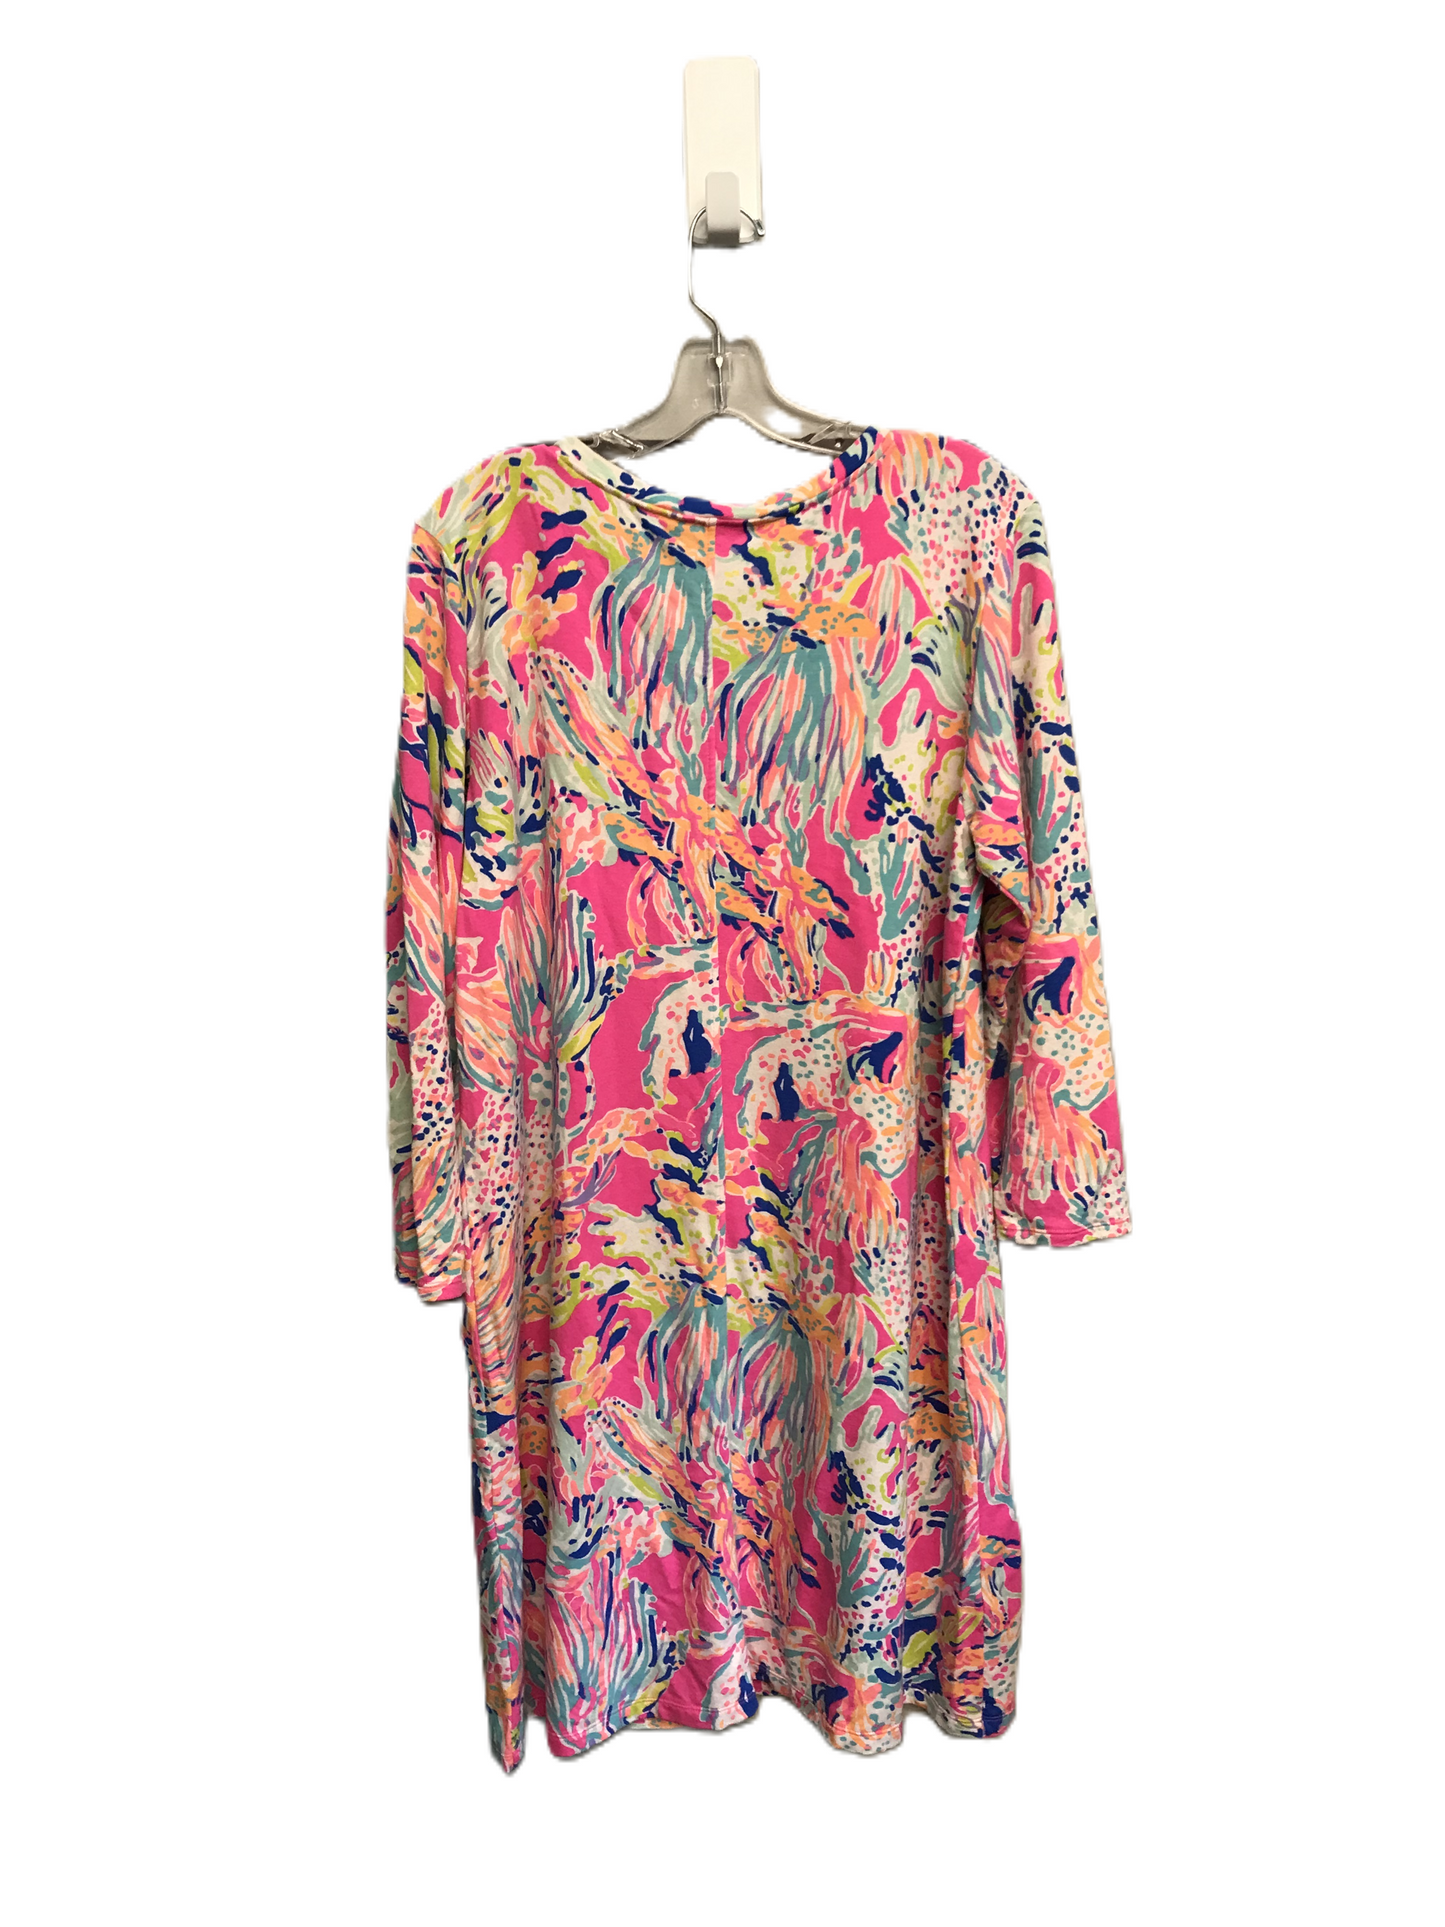 Multi-colored Dress Casual Short By Lilly Pulitzer, Size: Xl